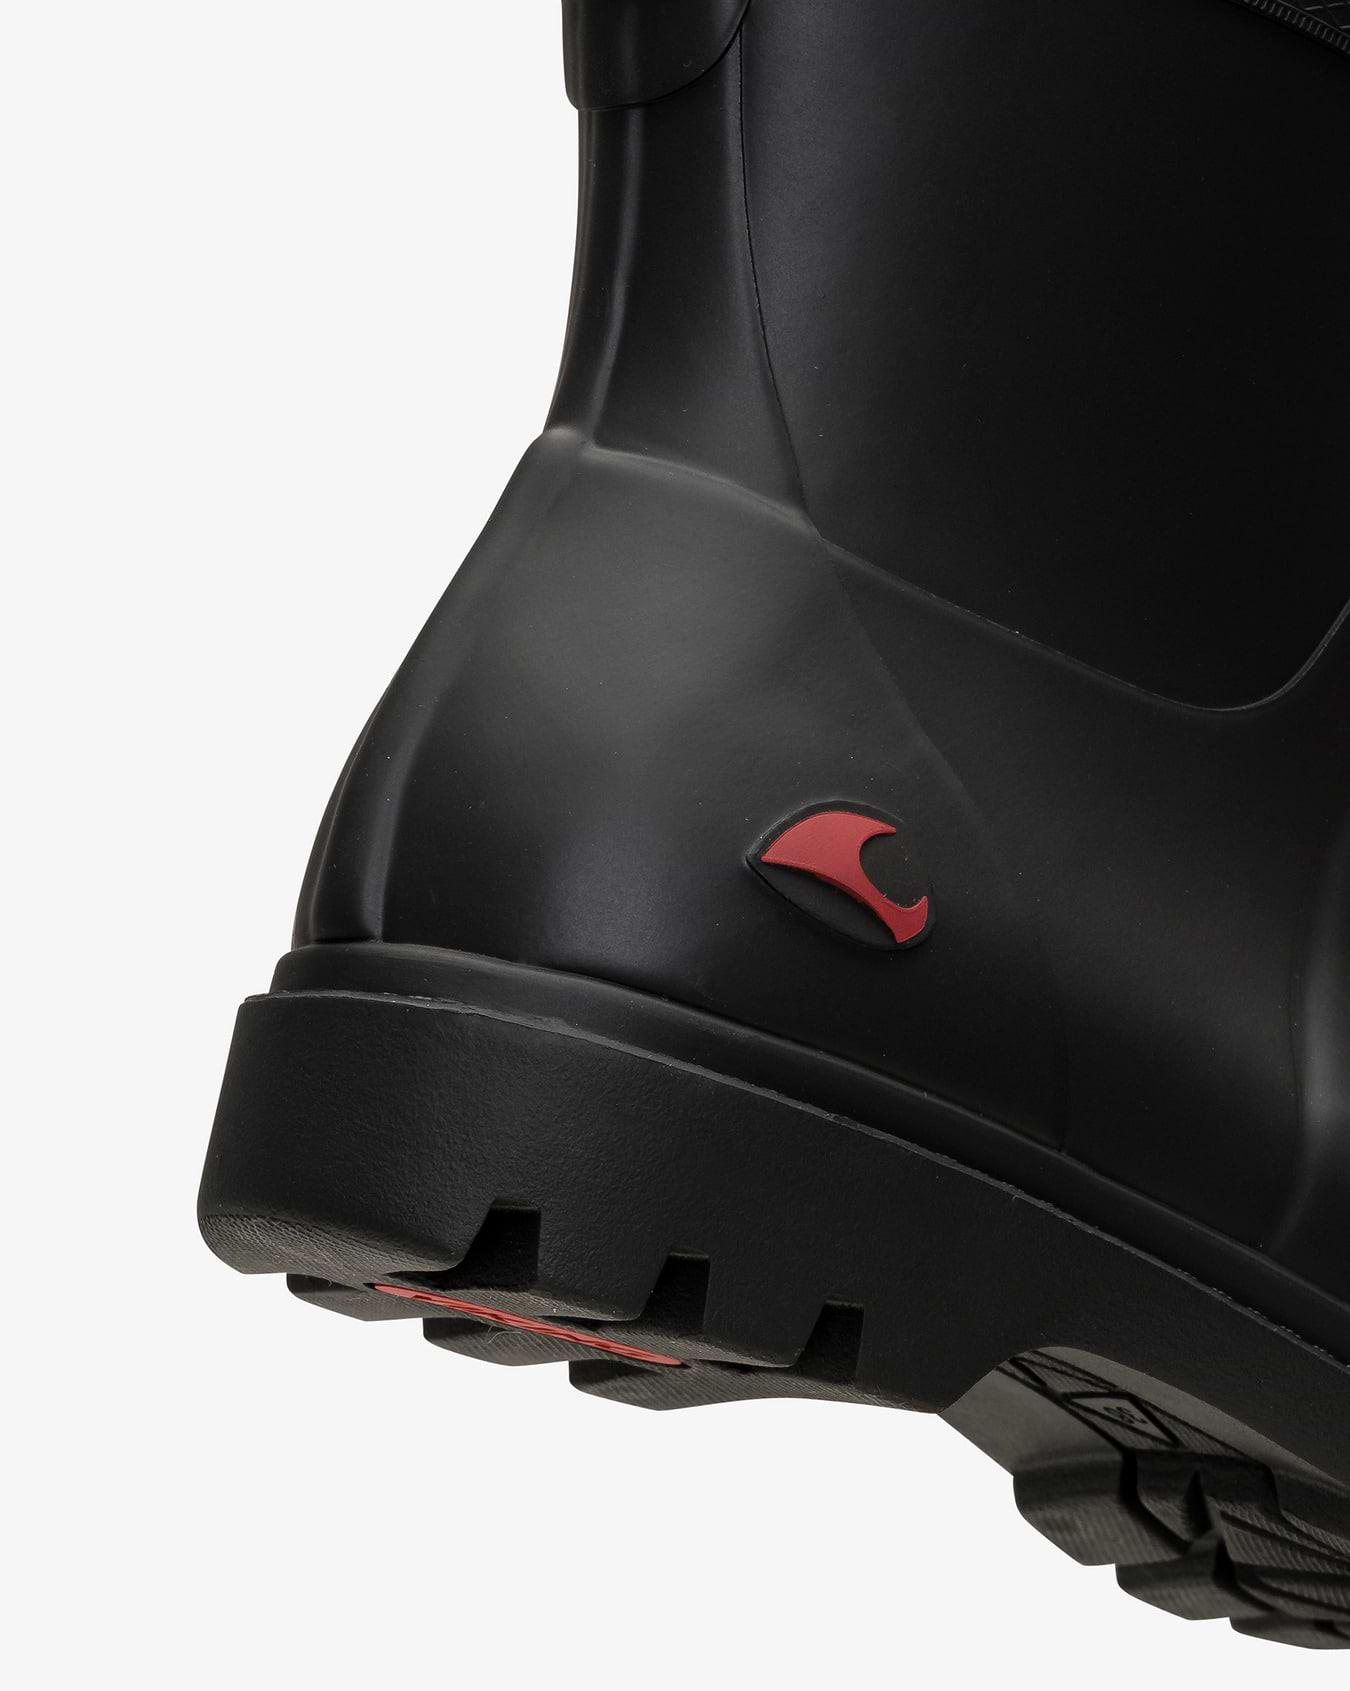 Noble Black Rubber Boot